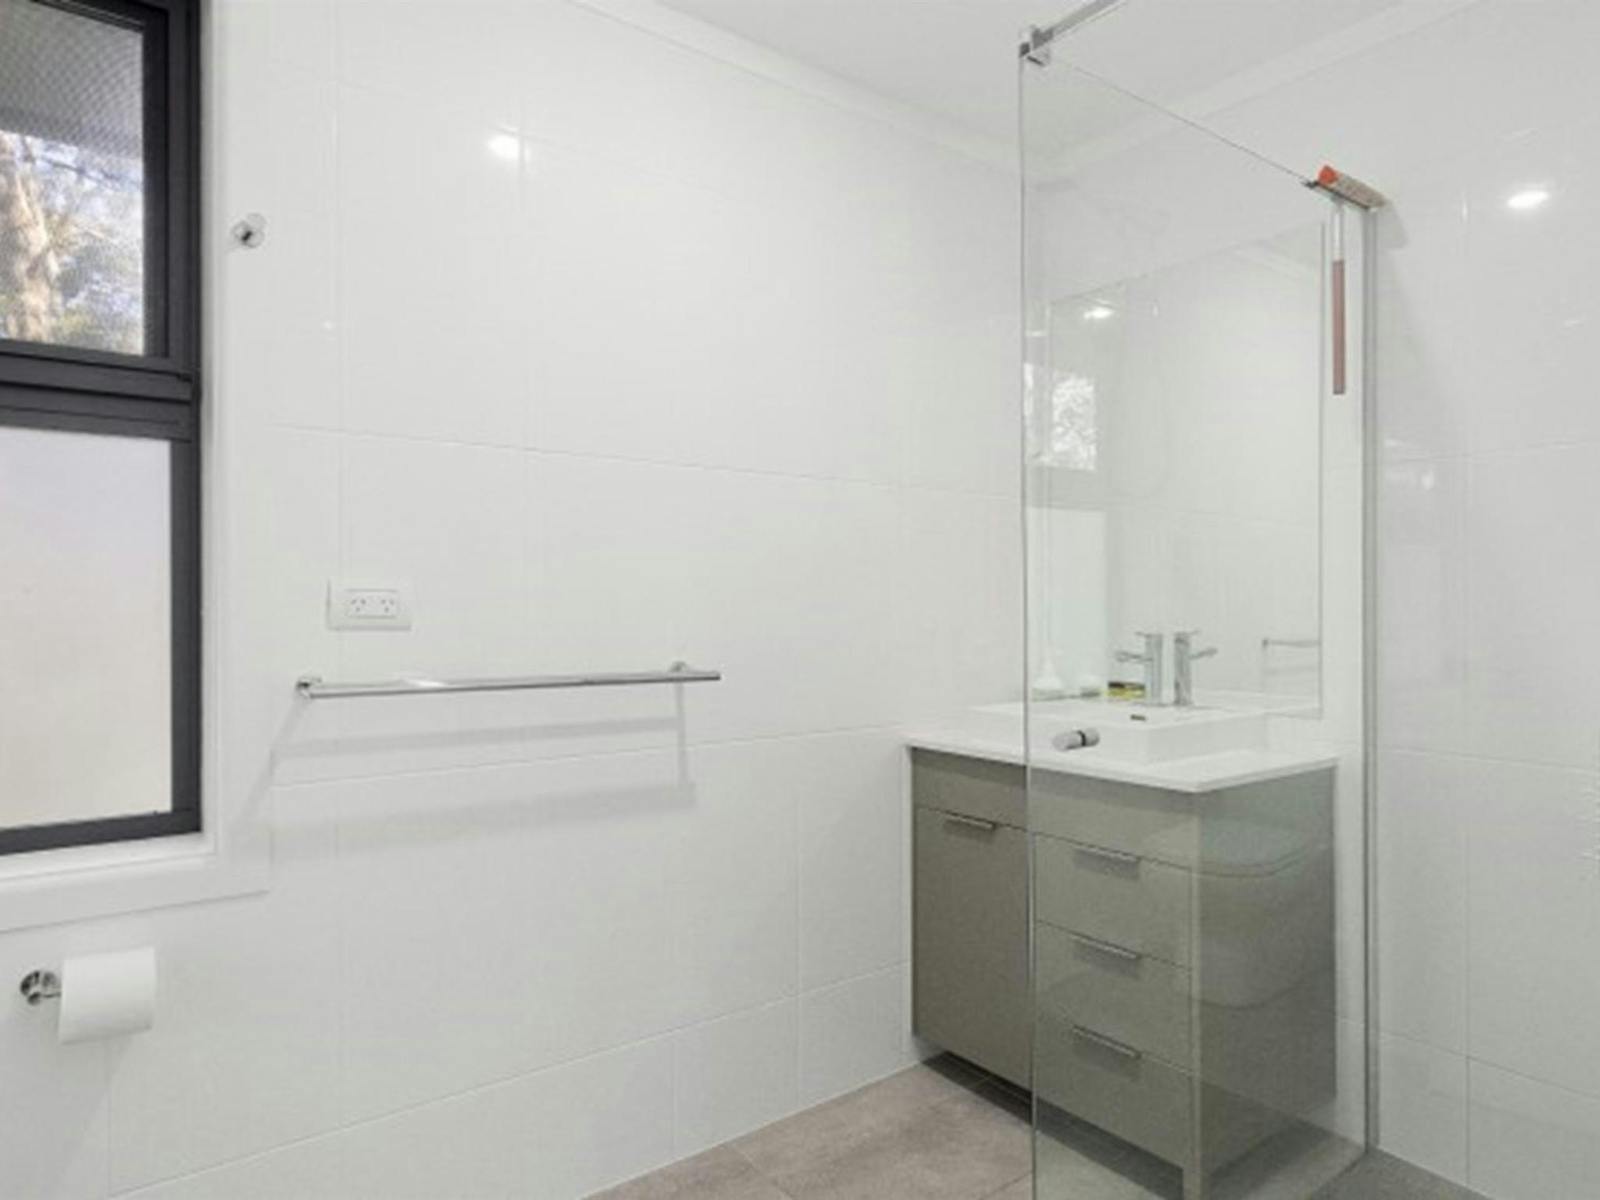 The bathroom in The Chalet, New England National Park. Photo: Mitchell Franzi © DPIE